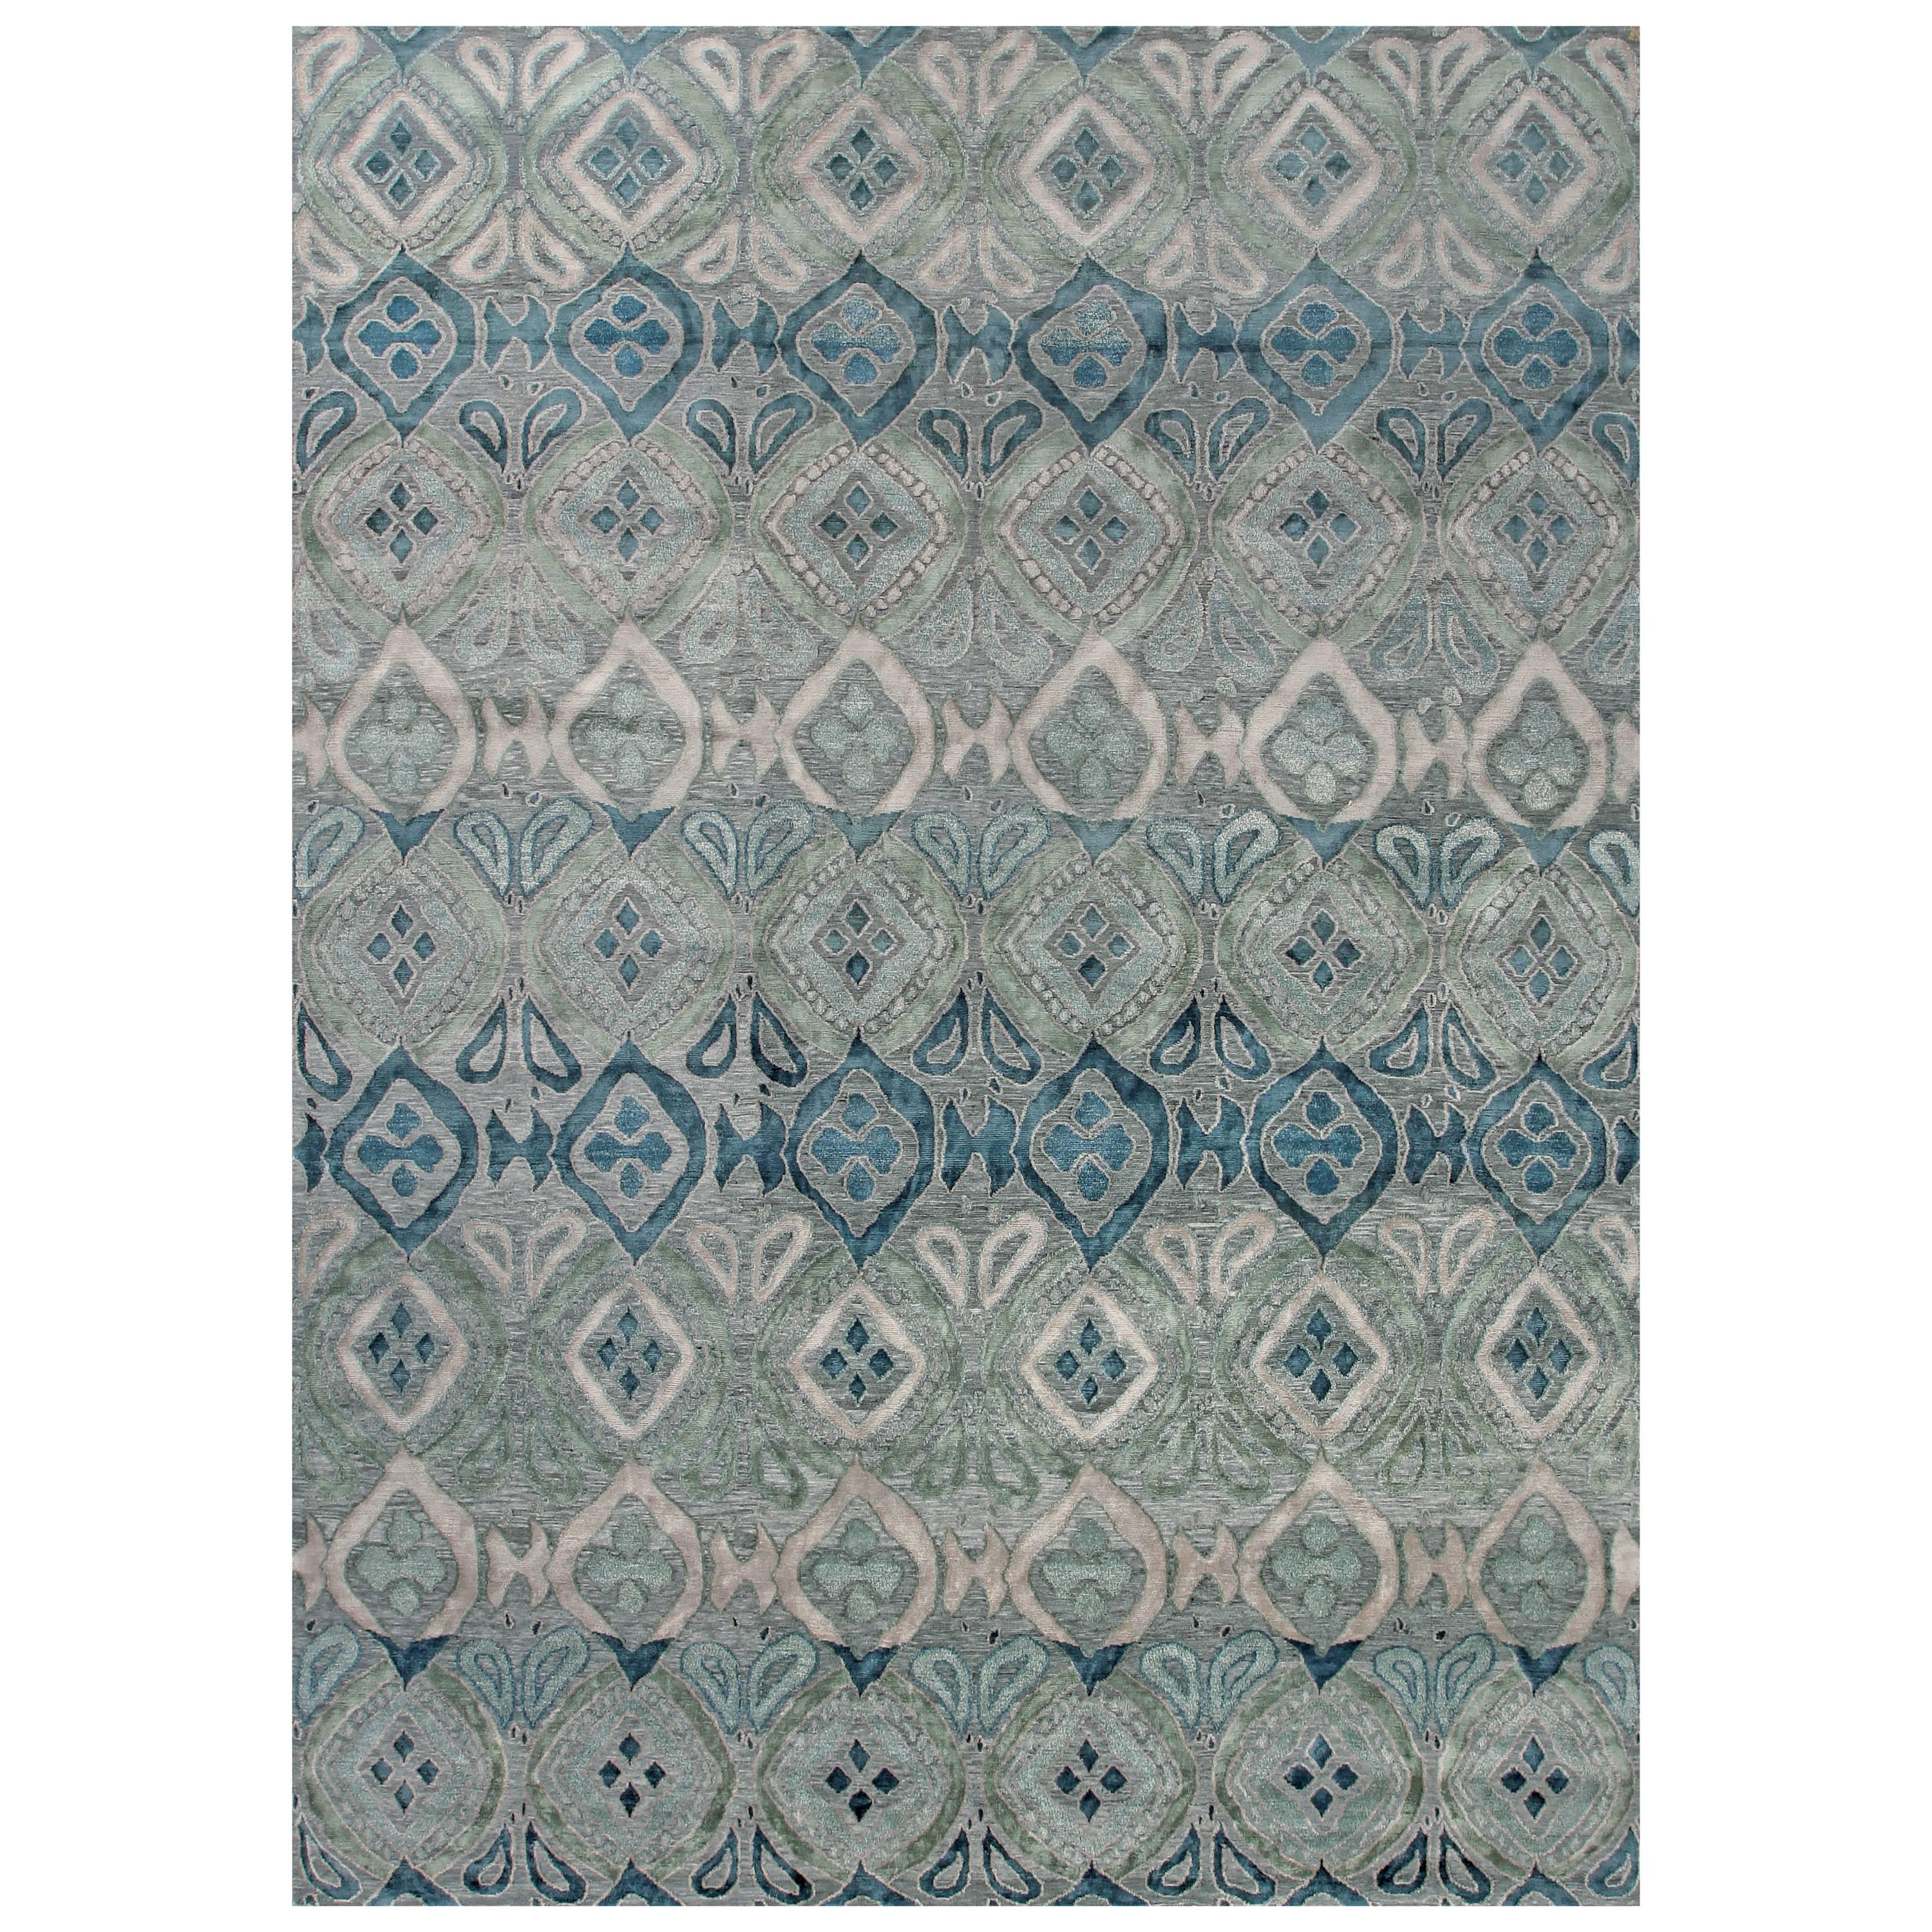 'Bali, Grey/Blue' Hand-Knotted Tibetan Rug Made in Nepal by New Moon Rugs